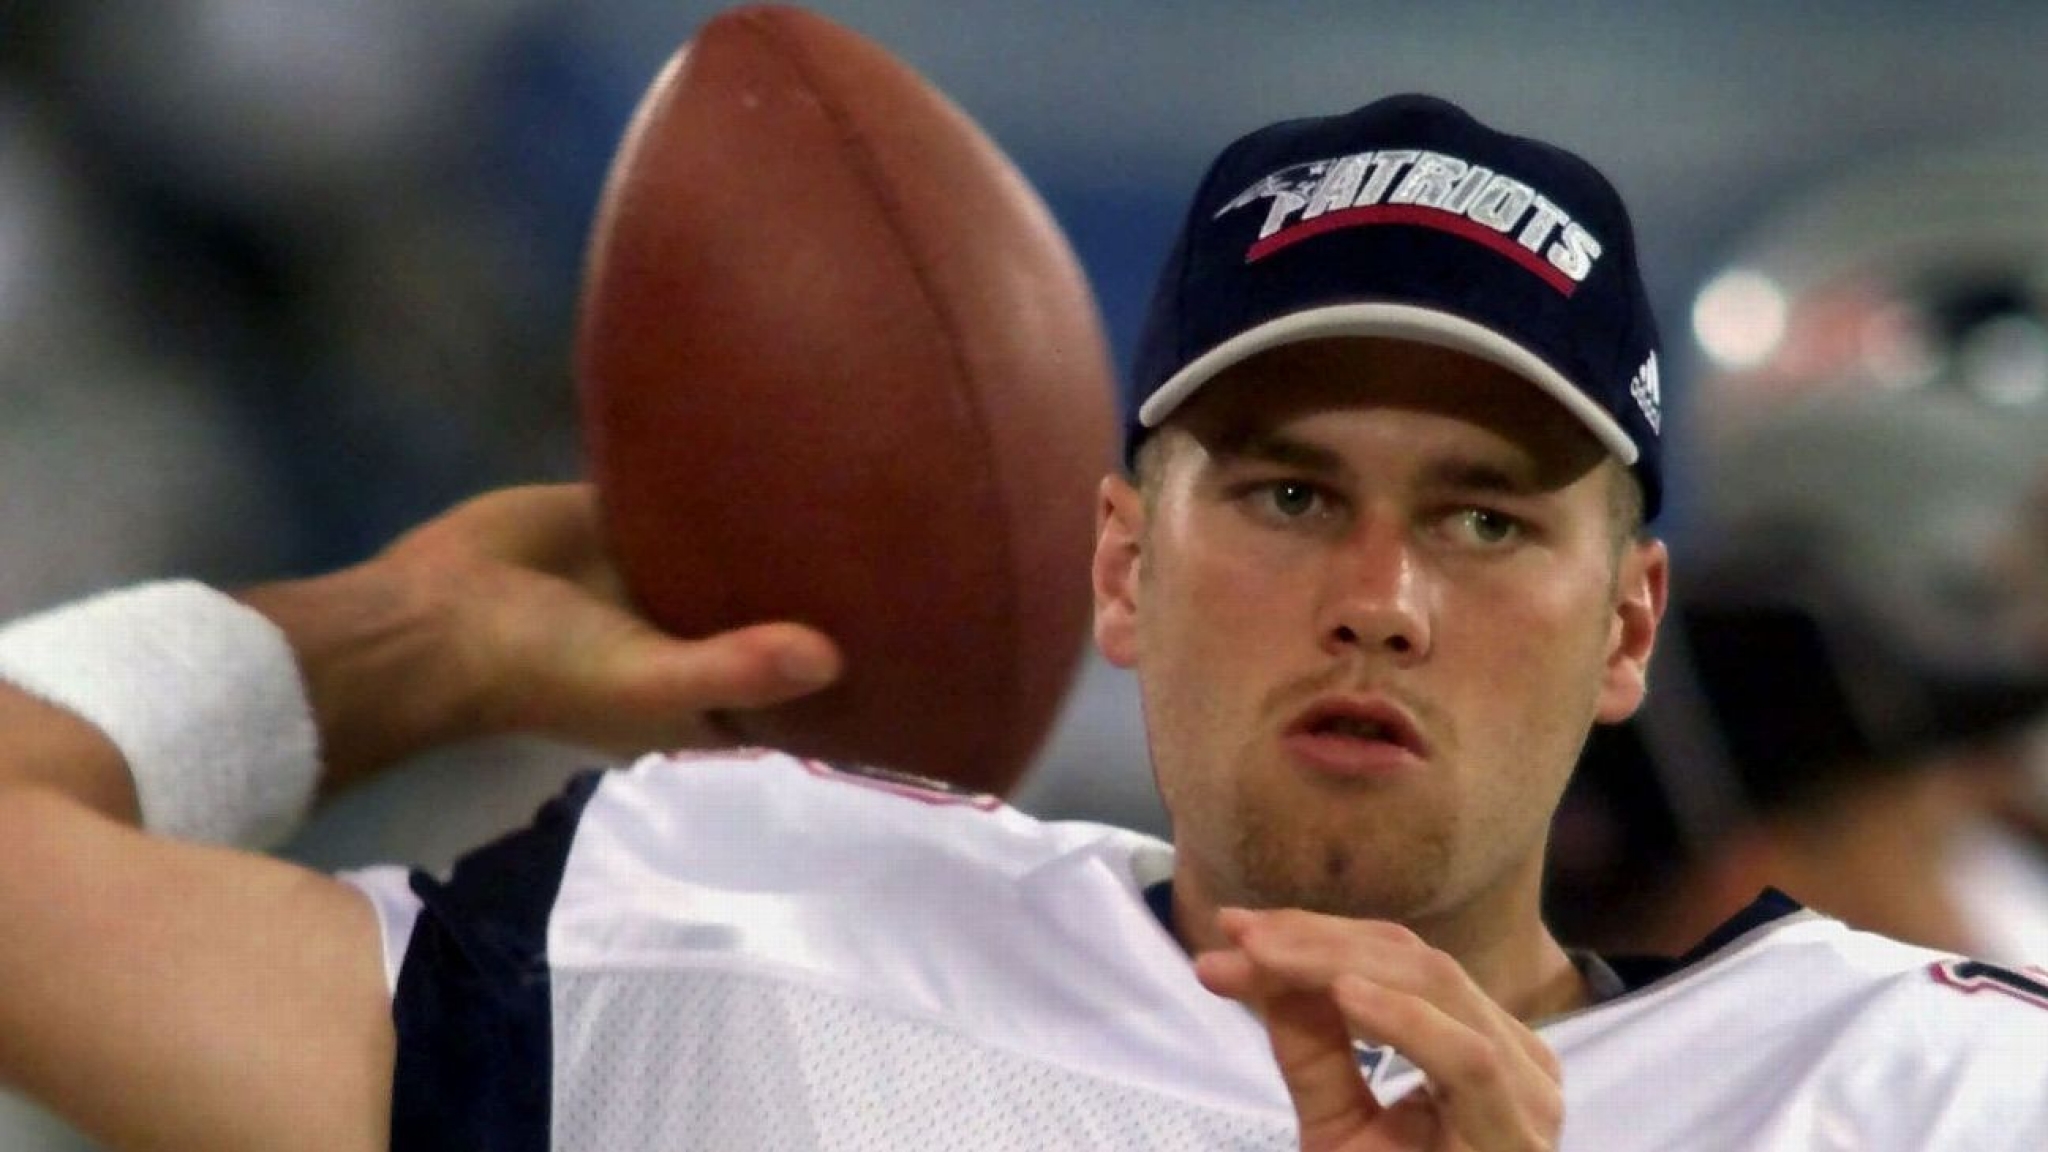 Brady rookie card sells for record $2.25 million